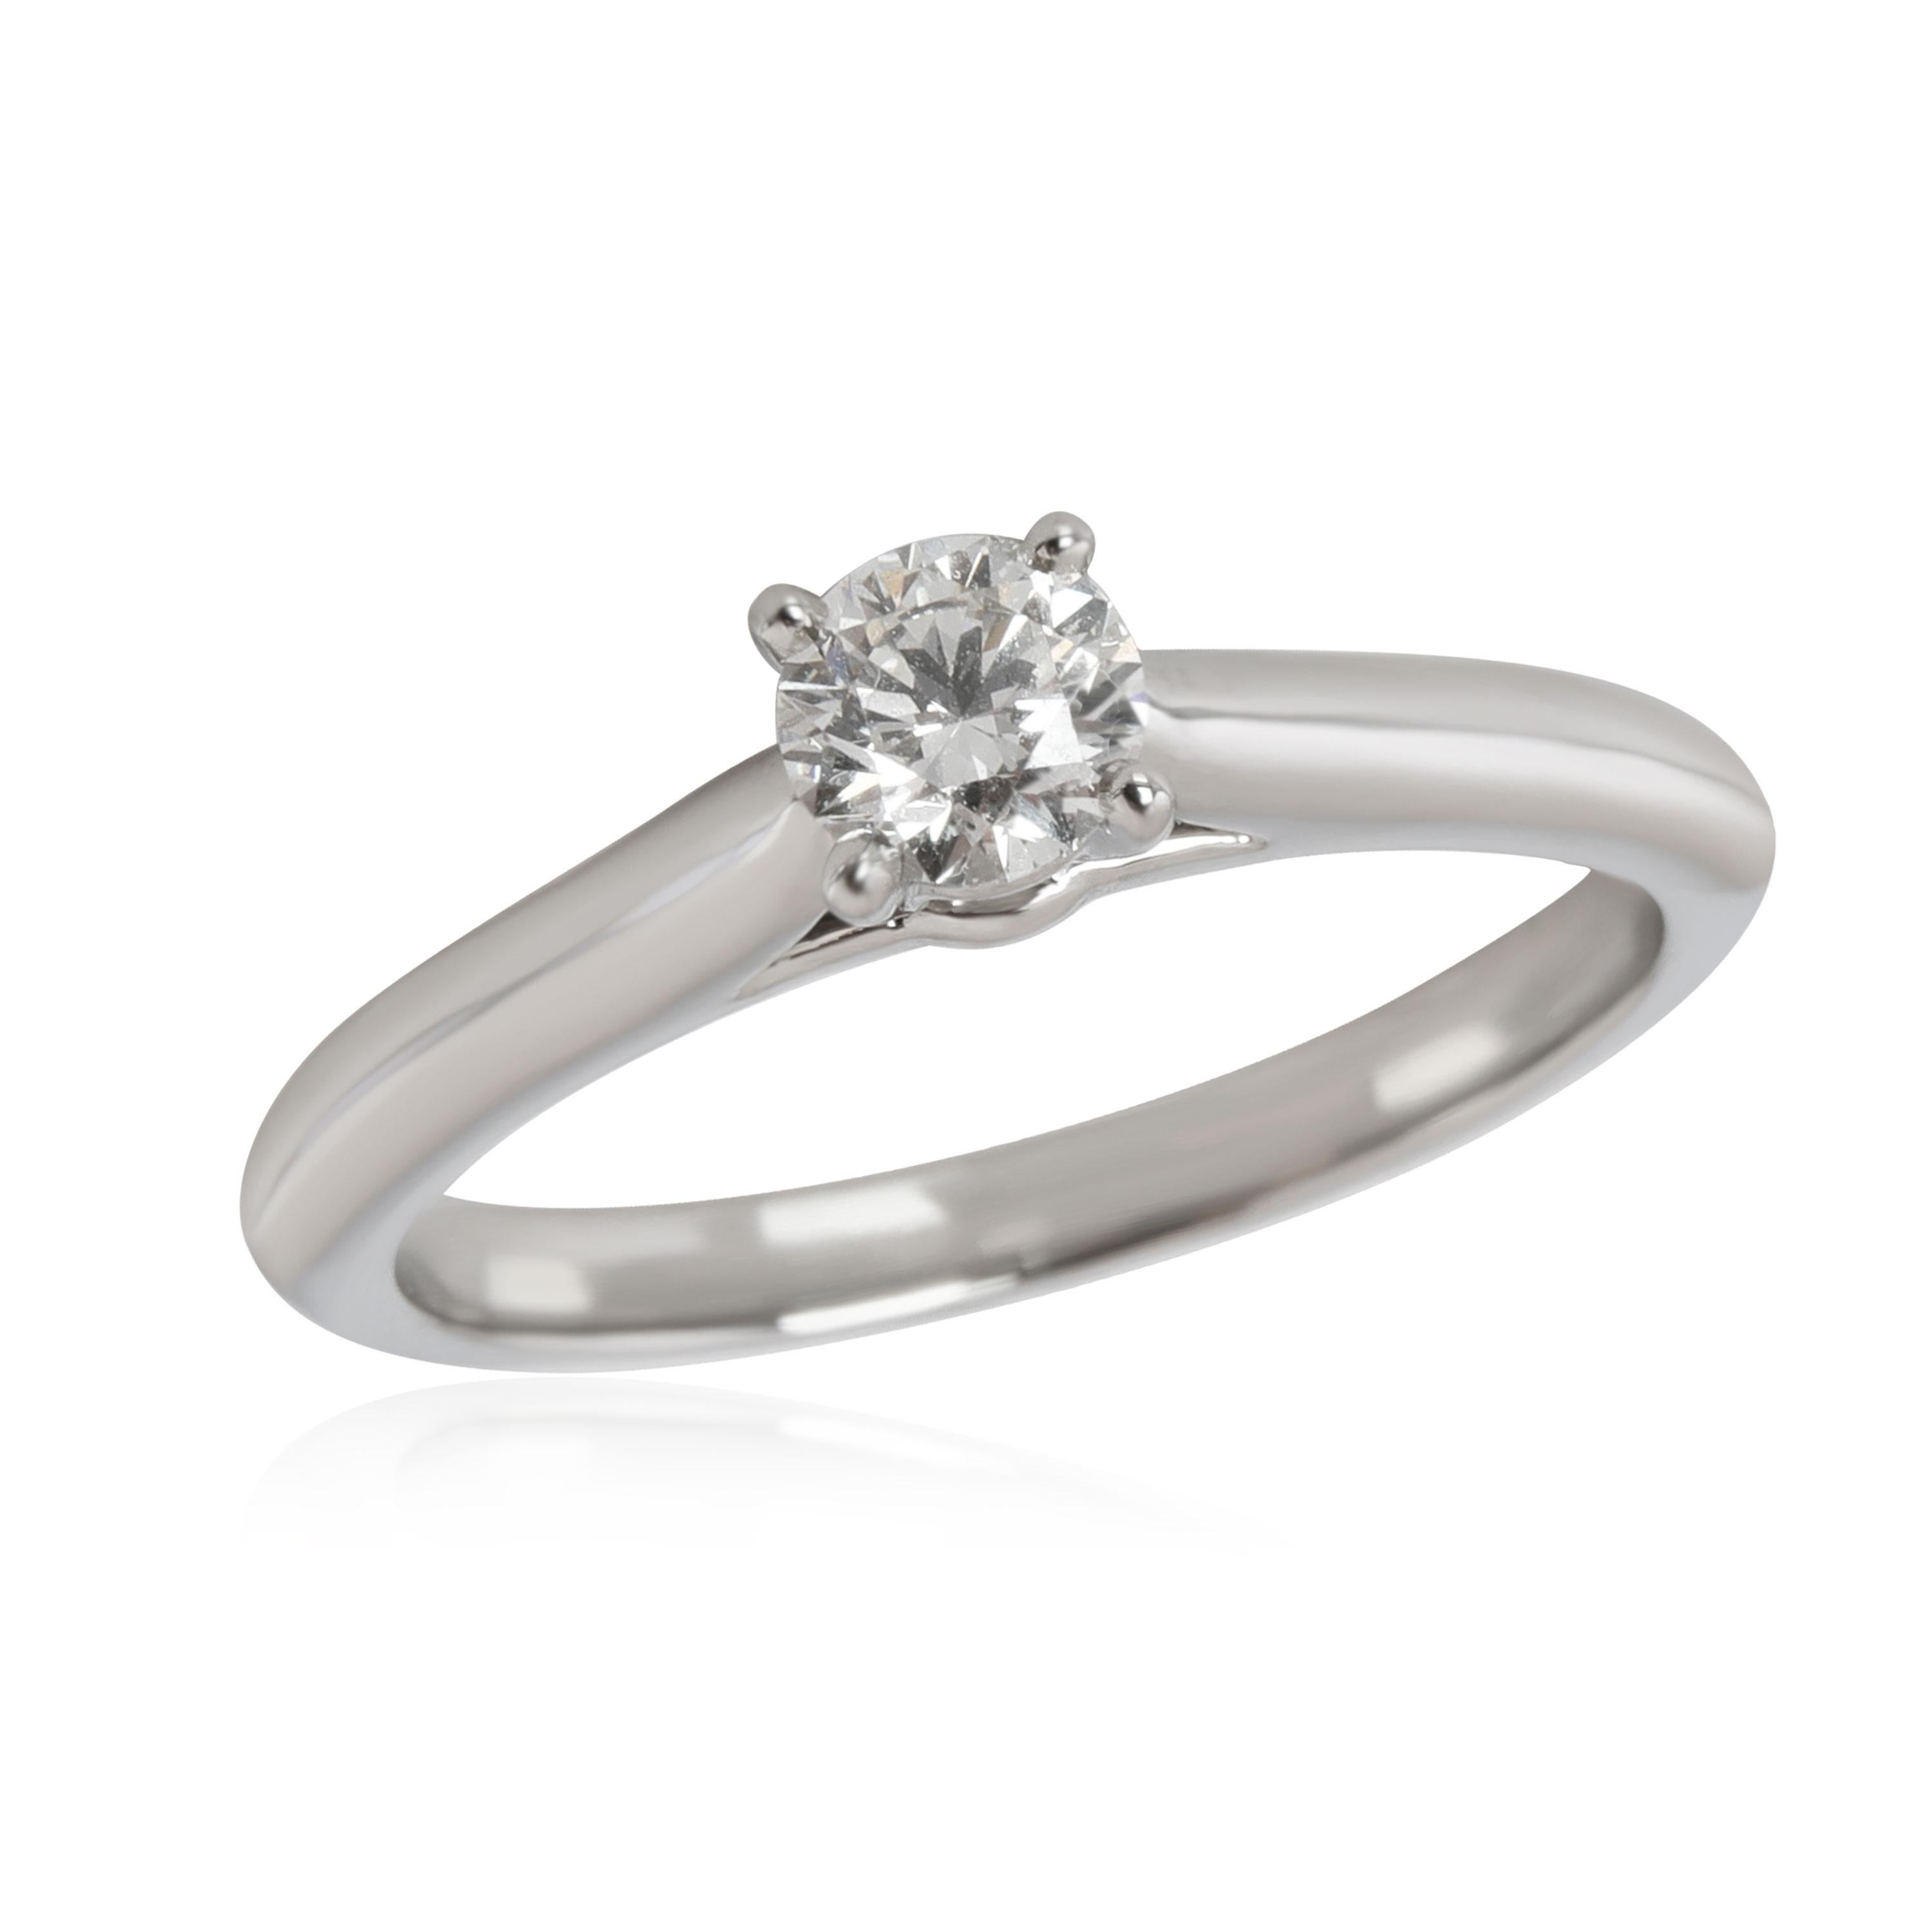 Cartier 1895 Diamond Engagement Ring in Platinum  H VVS1 0.3 CT

PRIMARY DETAILS
SKU: 113982
Listing Title: Cartier 1895 Diamond Engagement Ring in Platinum  H VVS1 0.3 CT
Condition Description: Retails for 4500 USD. In excellent condition and